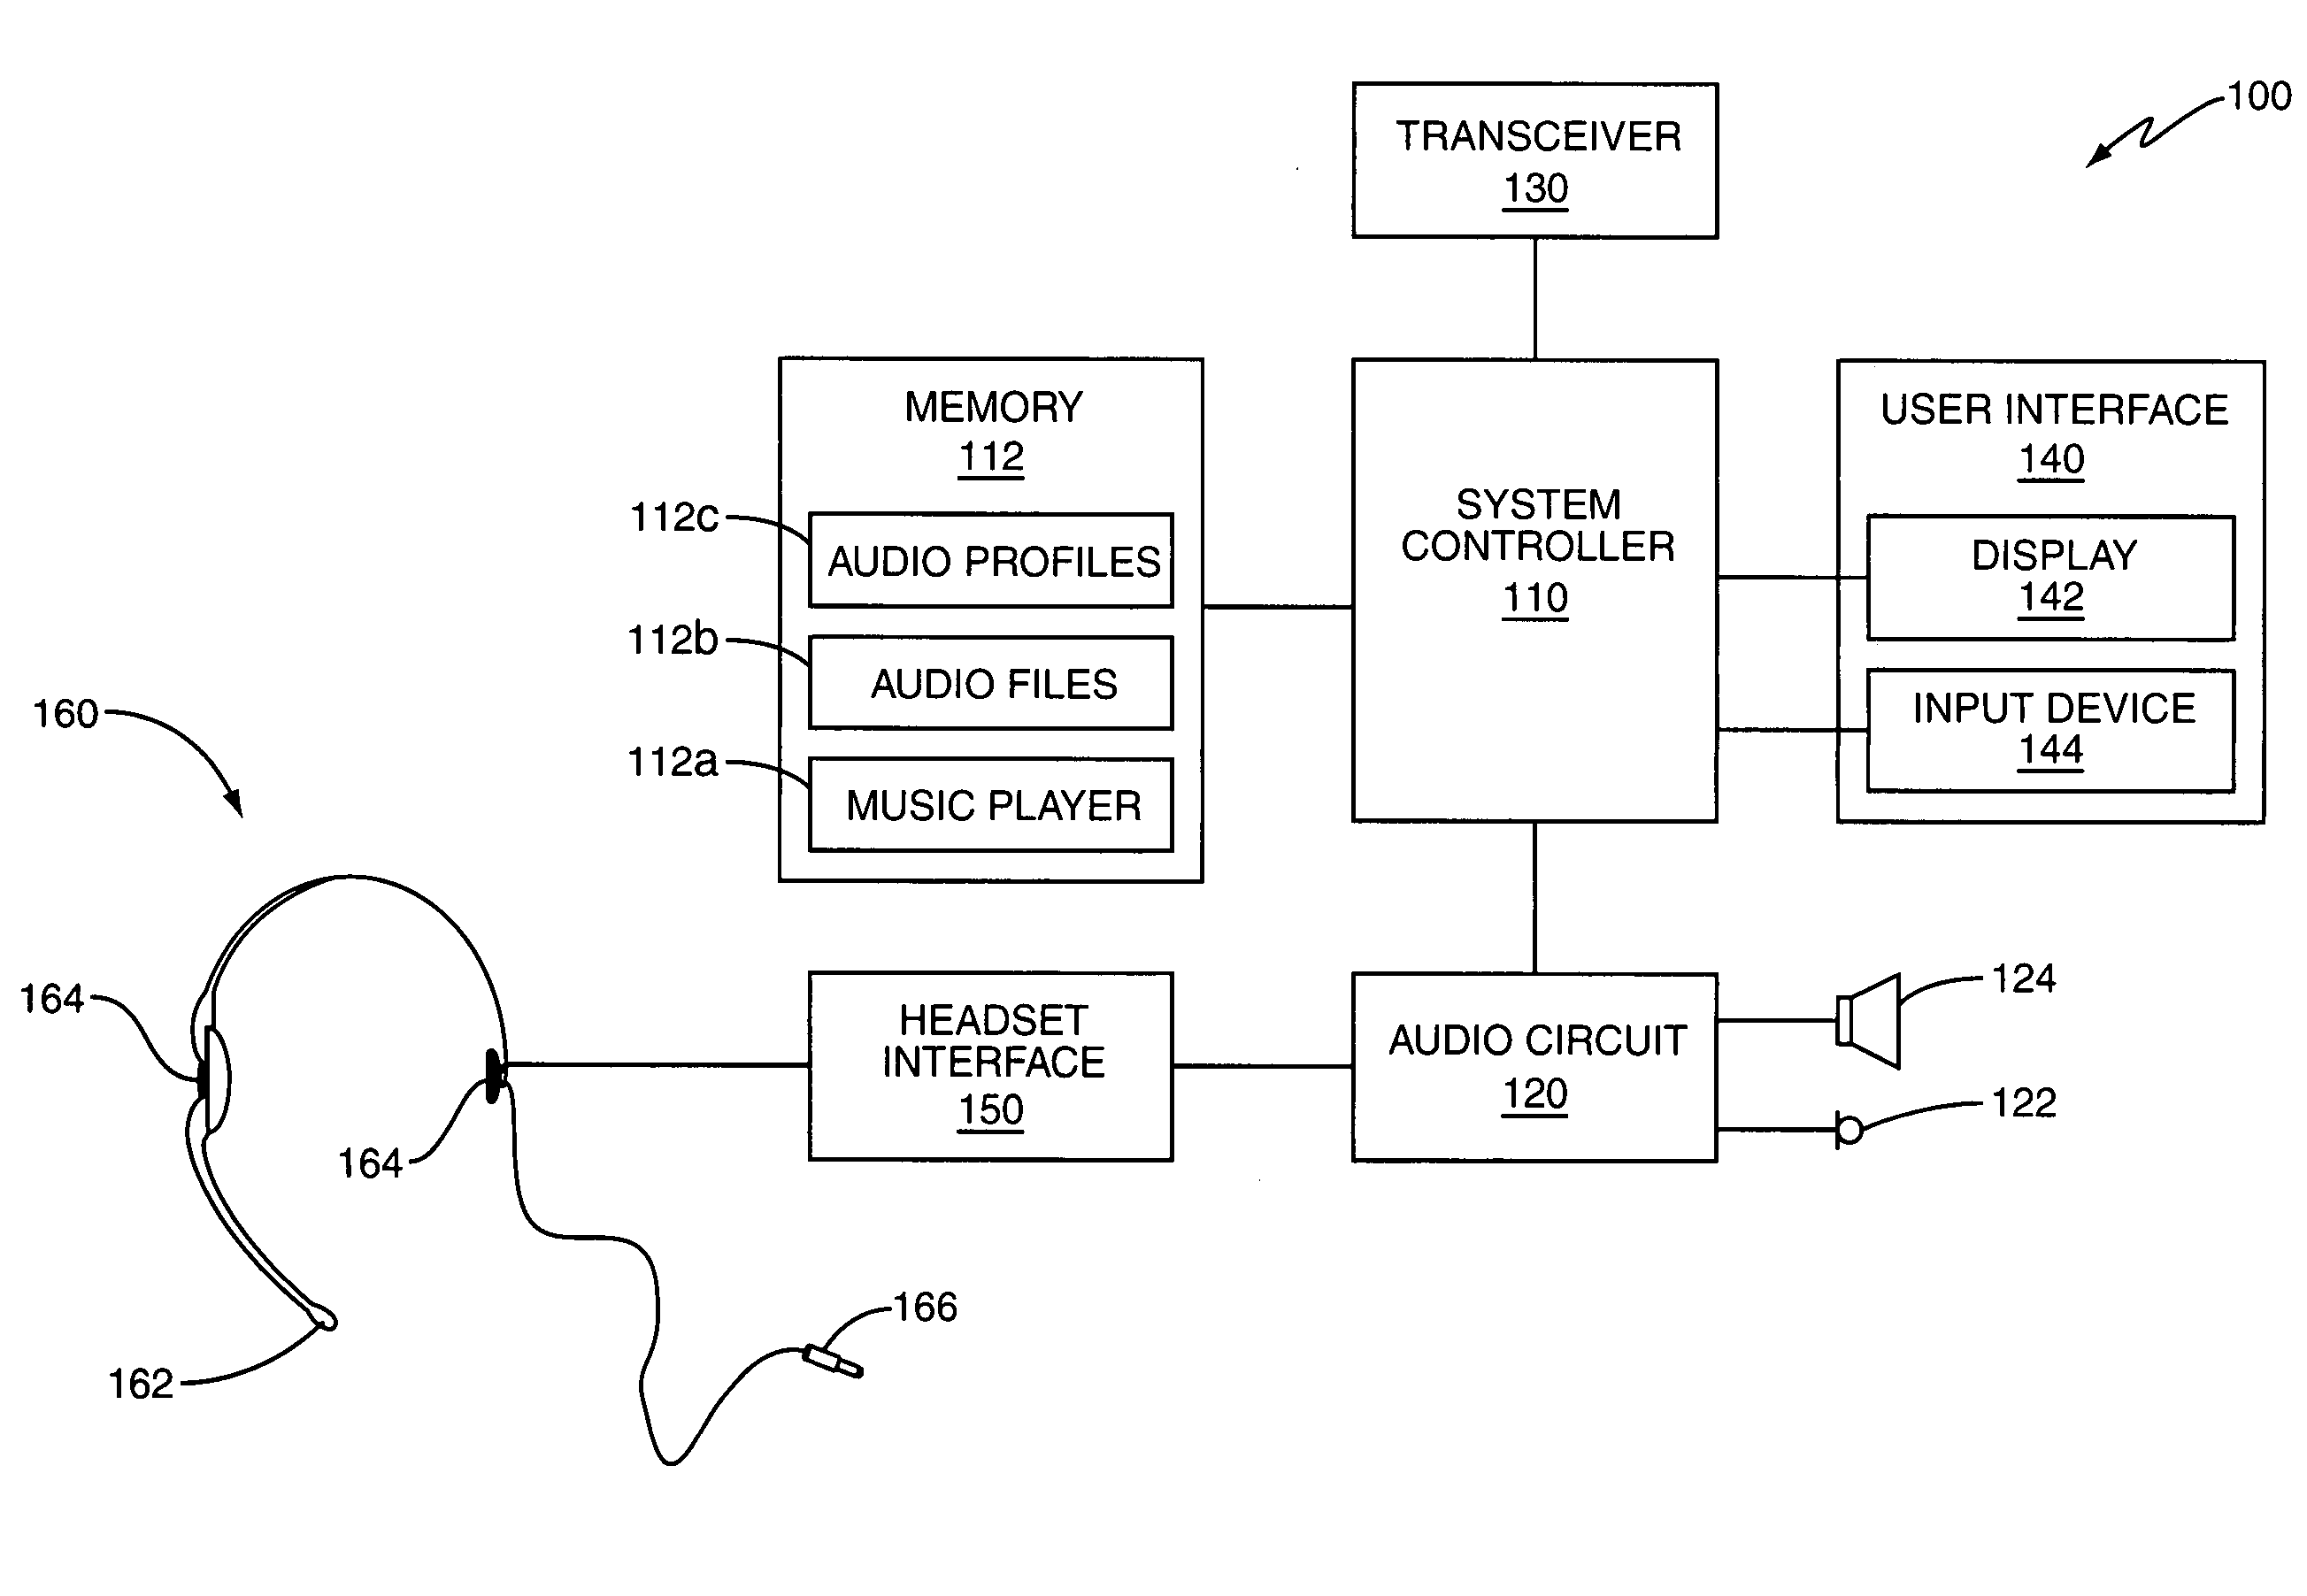 Audio profiles for portable music playback device